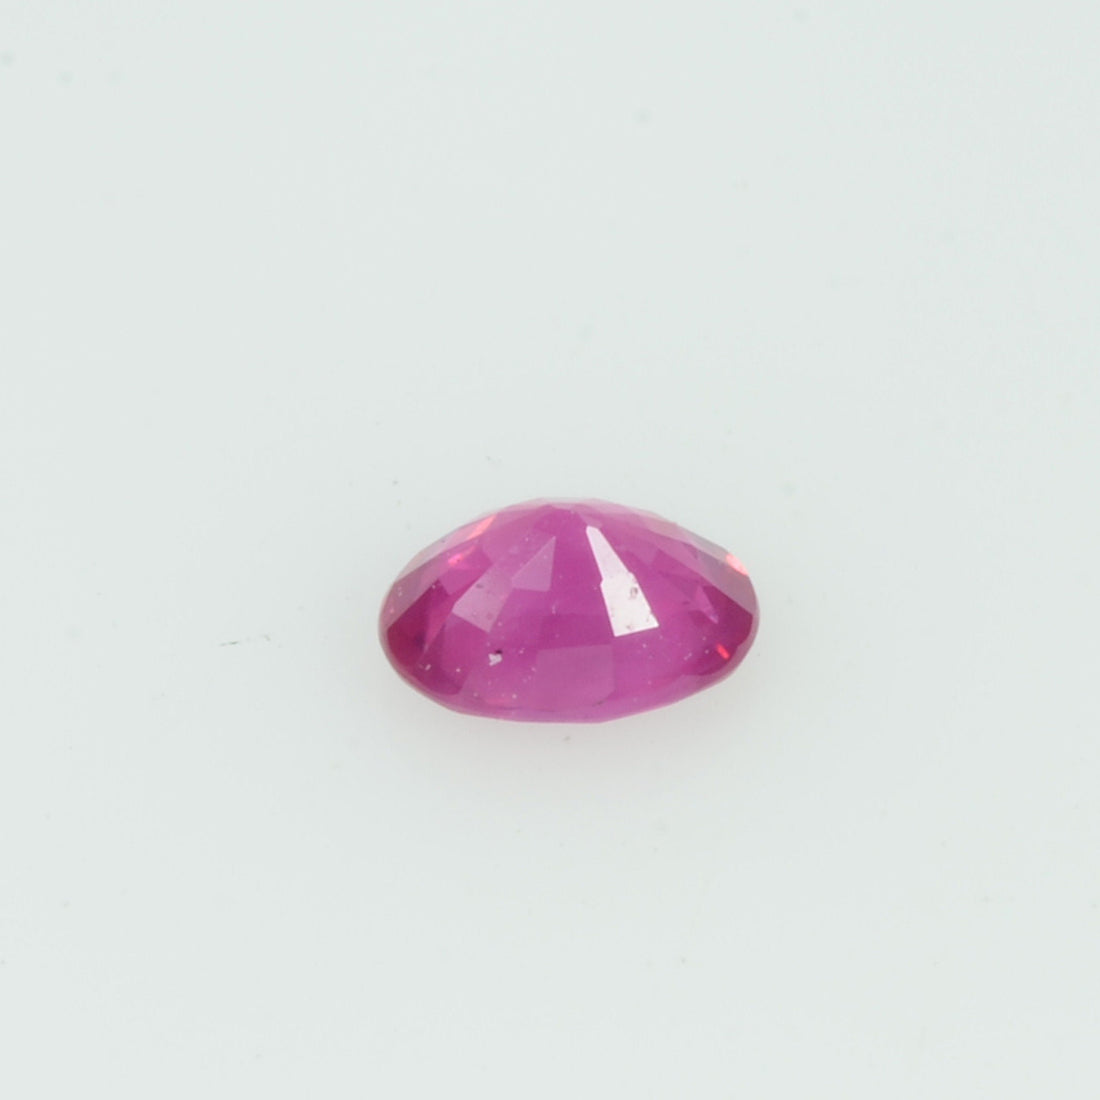 0.24 Cts Natural Vietnam Ruby Loose Gemstone Oval Cut